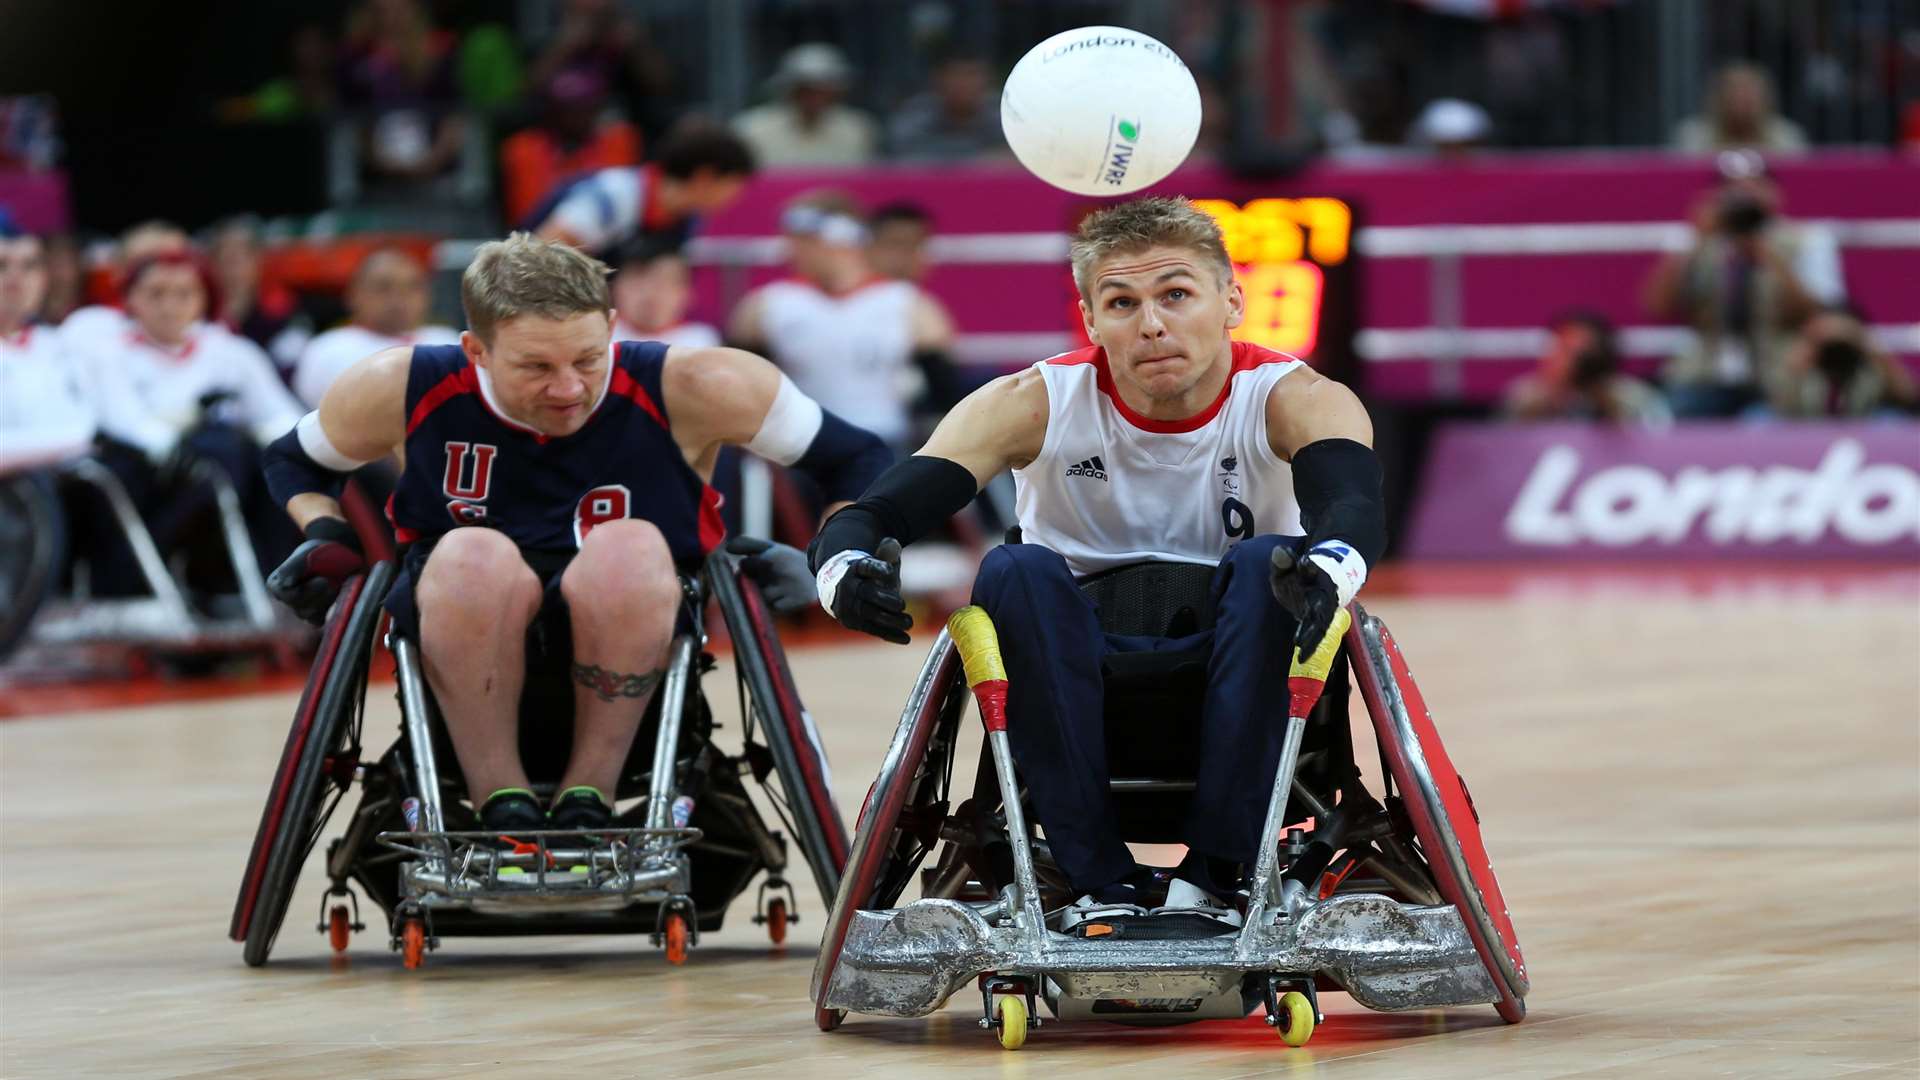 Paralympian Steve Brown, right, will speak at the Wellbeing Symposium. Picture: Lynne Cameron/PA Wire